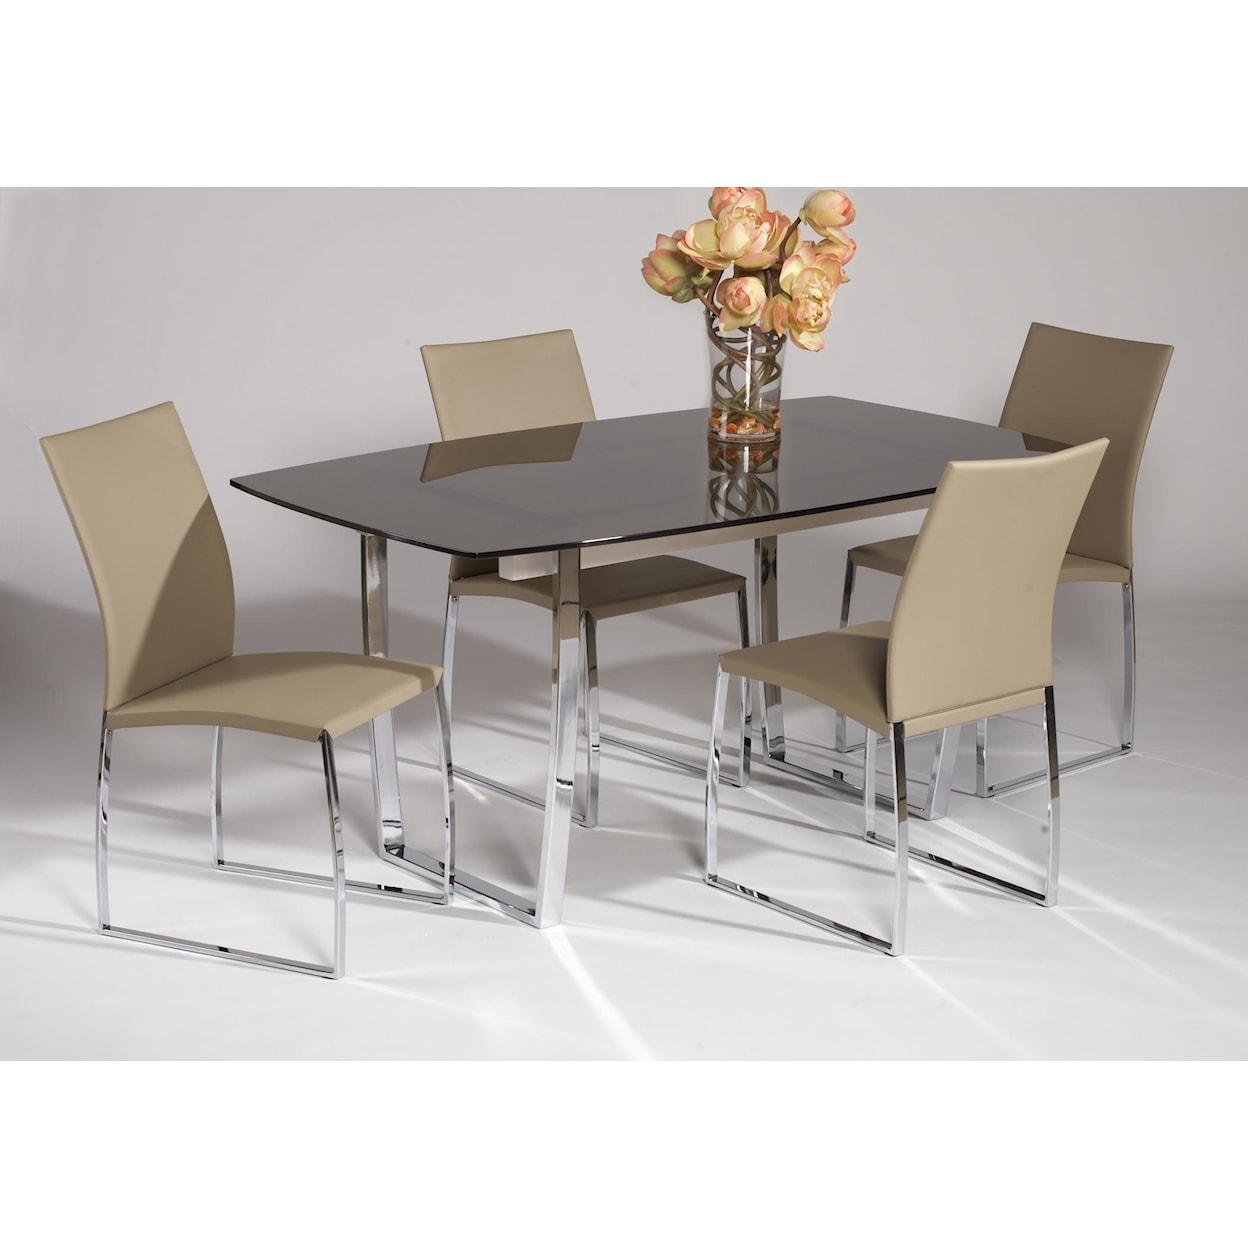 Chintaly Imports Marcy 5-Piece Glass Top Dining Set